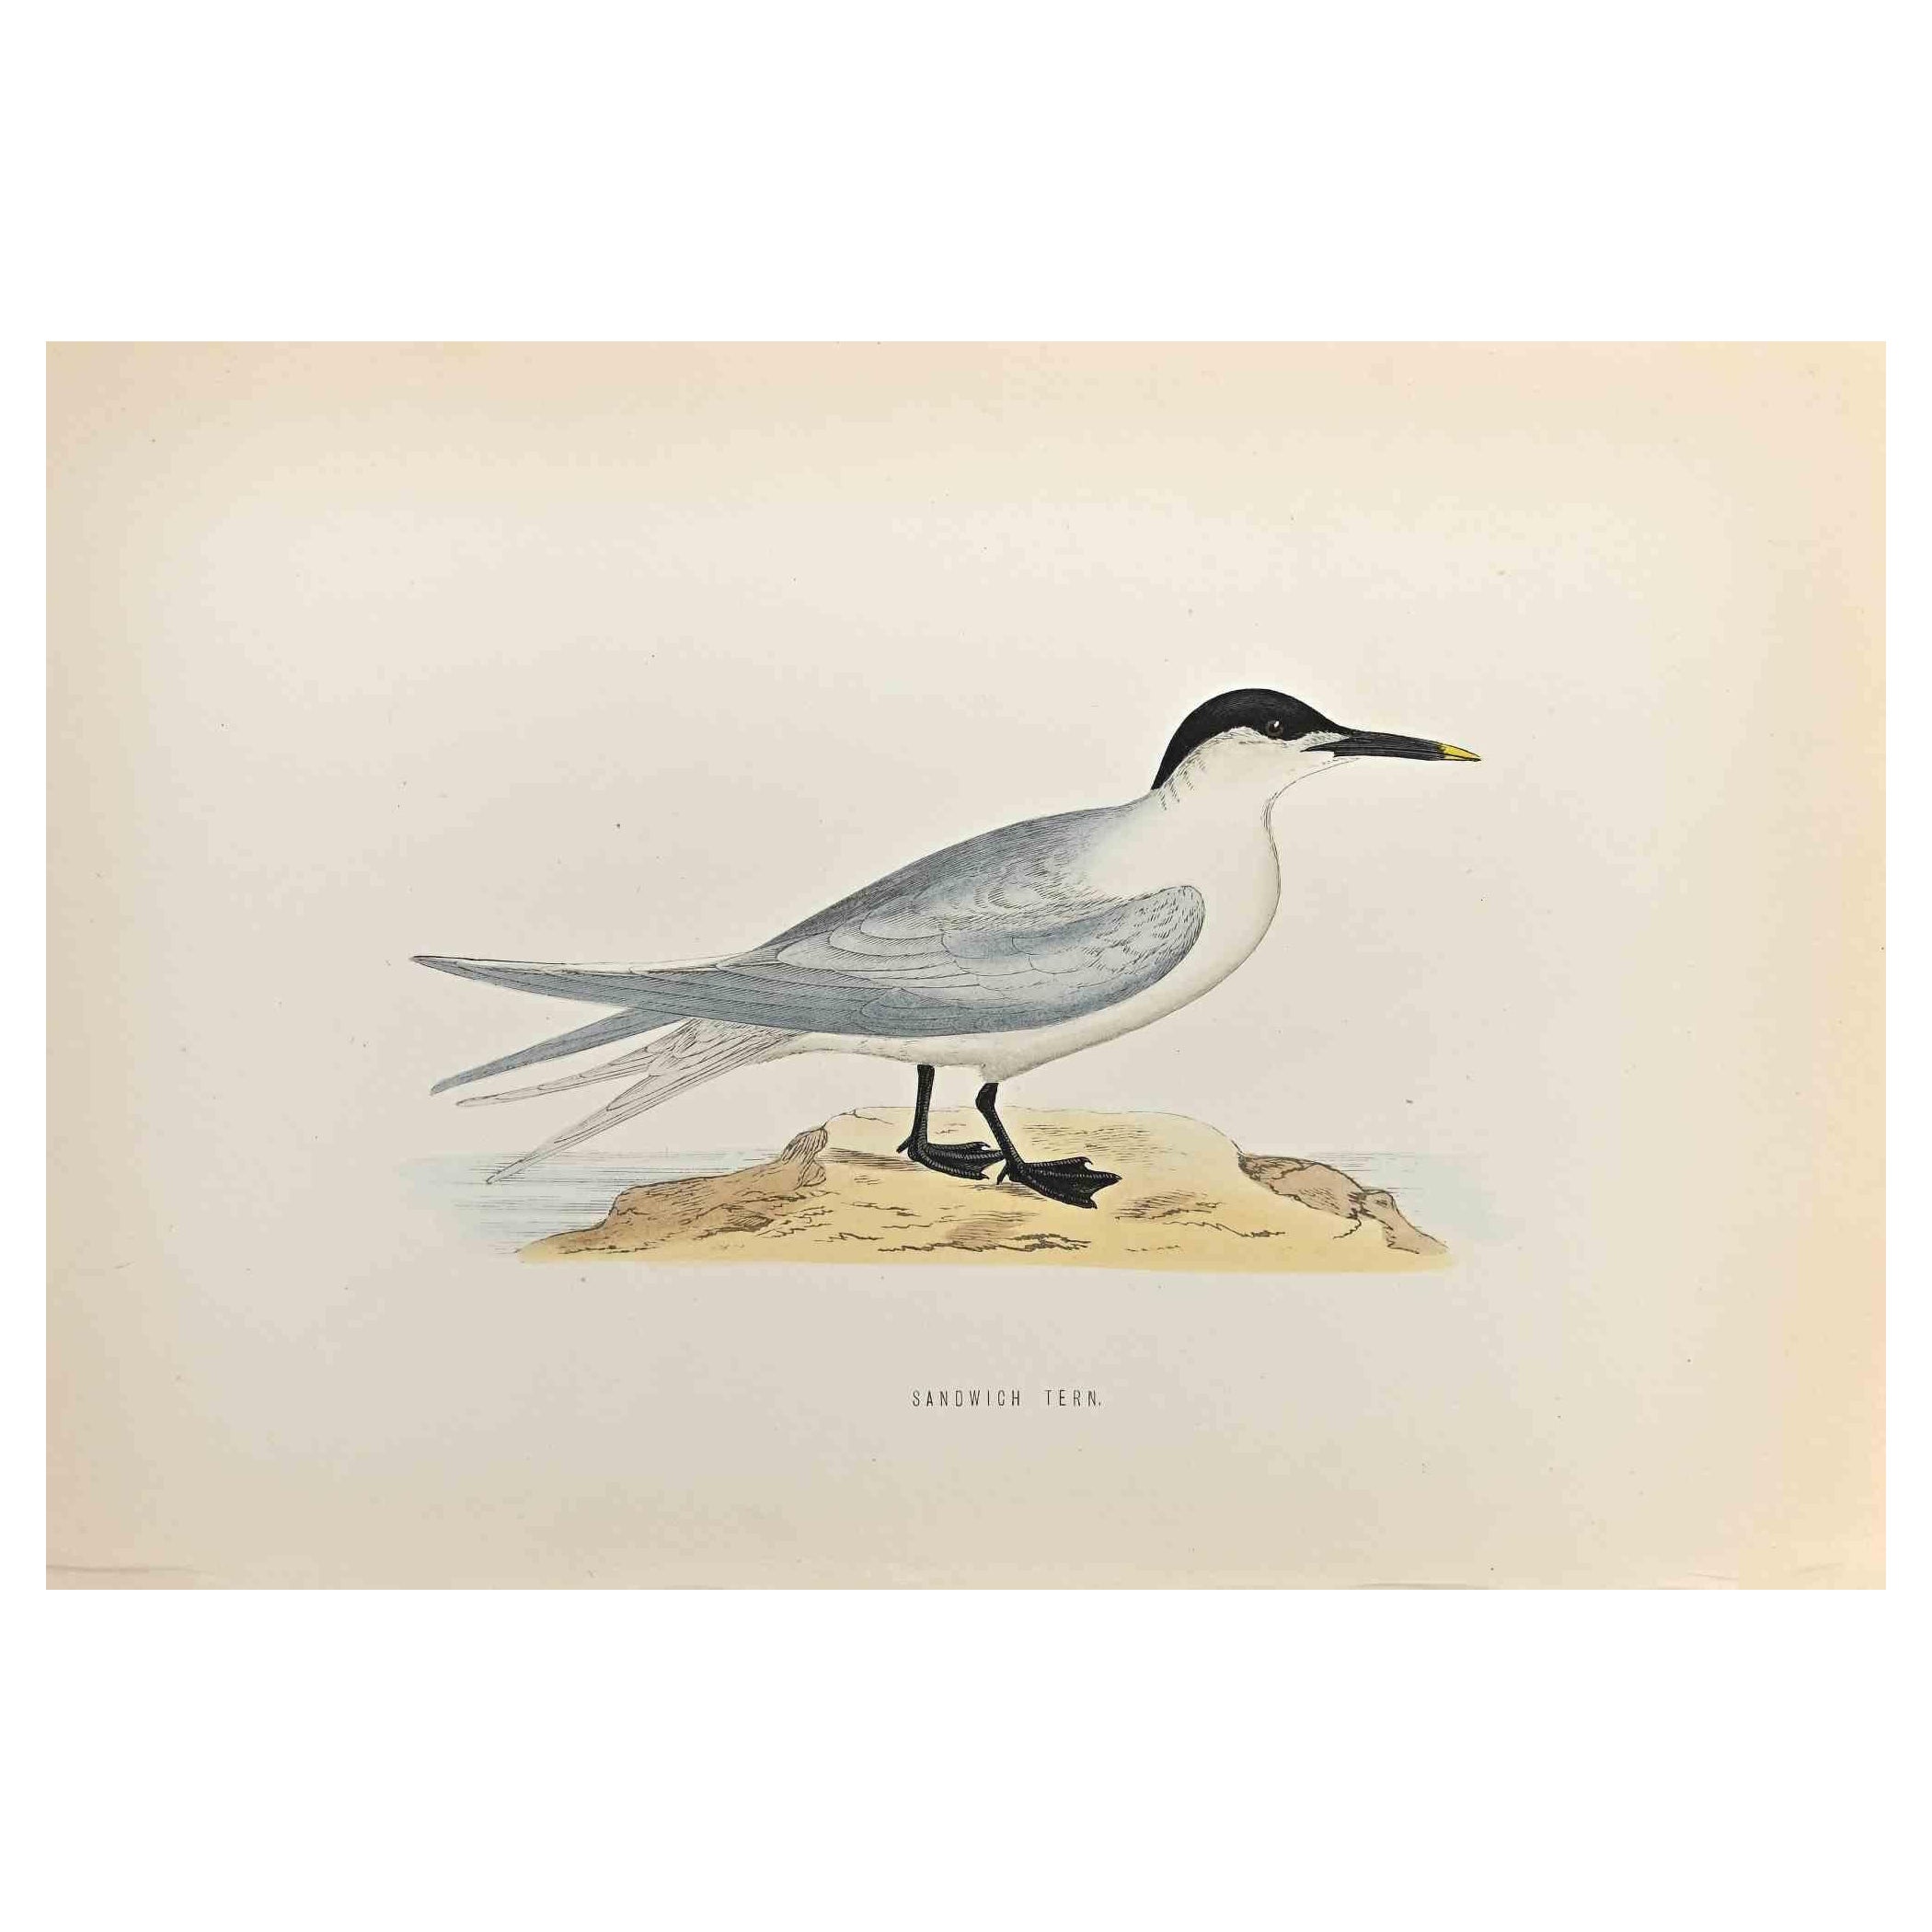 Sandwich Tern is a modern artwork realized in 1870 by the British artist Alexander Francis Lydon (1836-1917) . 

Woodcut print, hand colored, published by London, Bell & Sons, 1870.  Name of the bird printed in plate. This work is part of a print